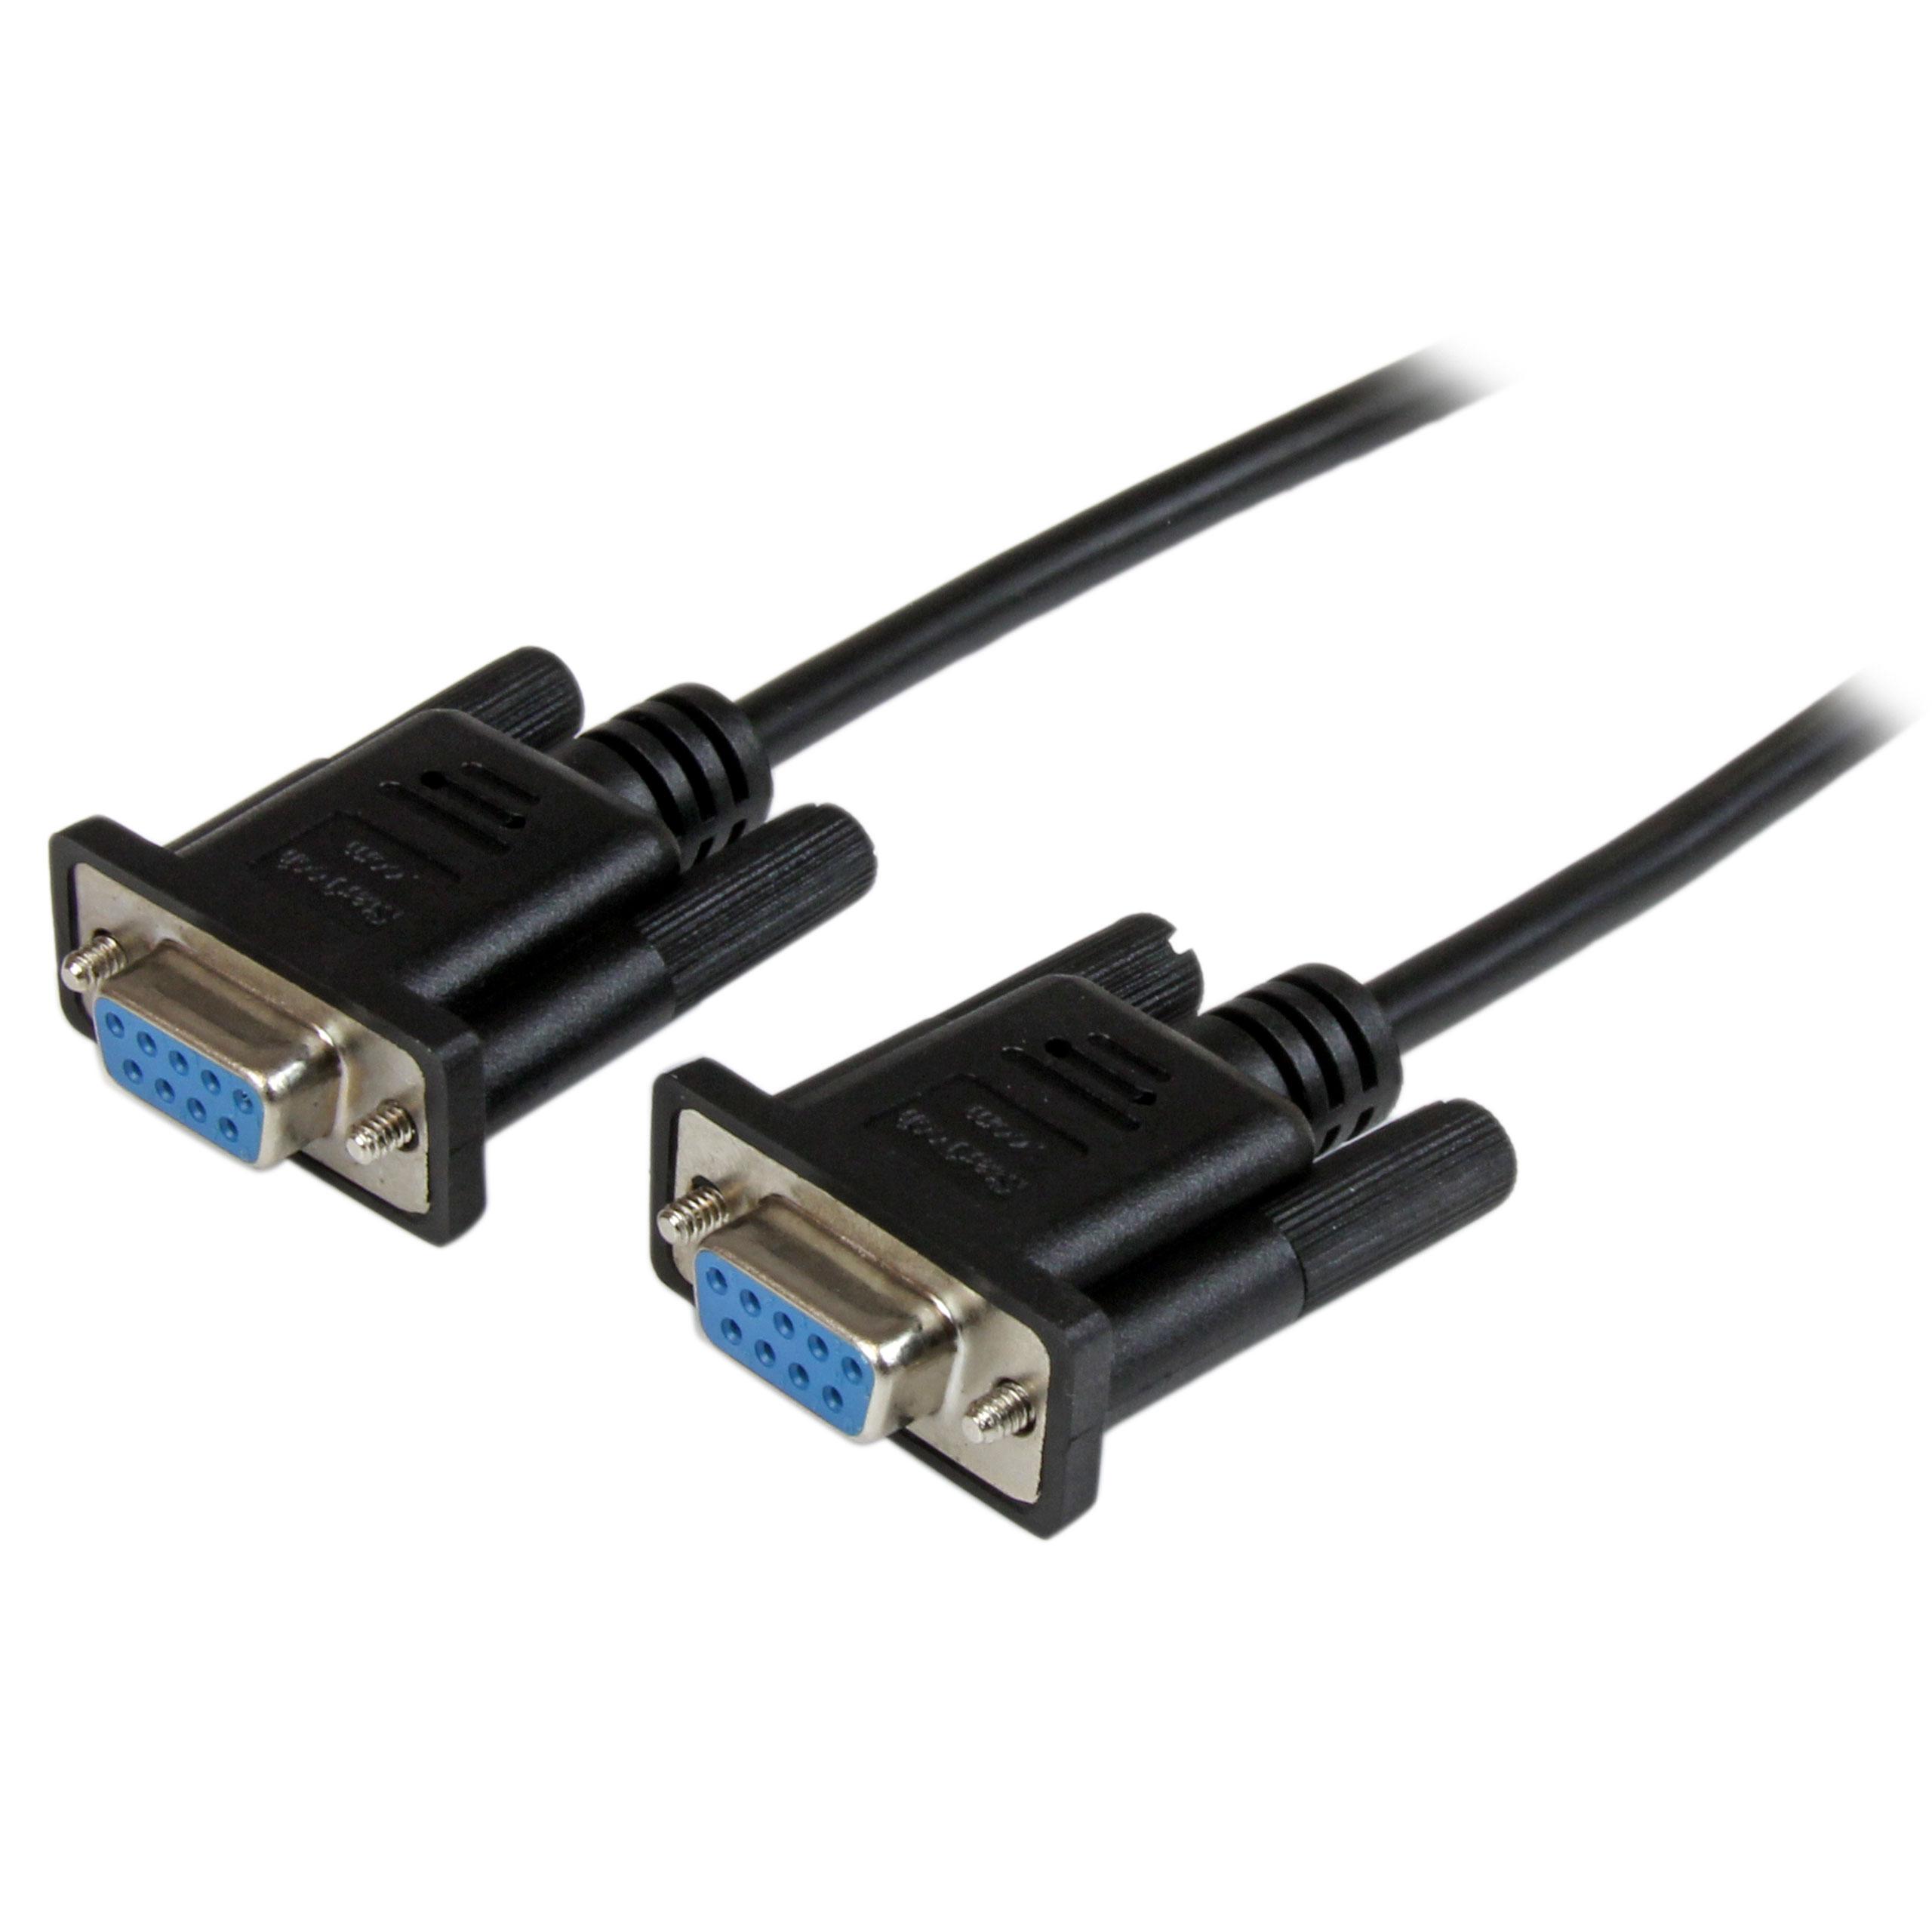 Rs-232 serial cable db9 to rj11